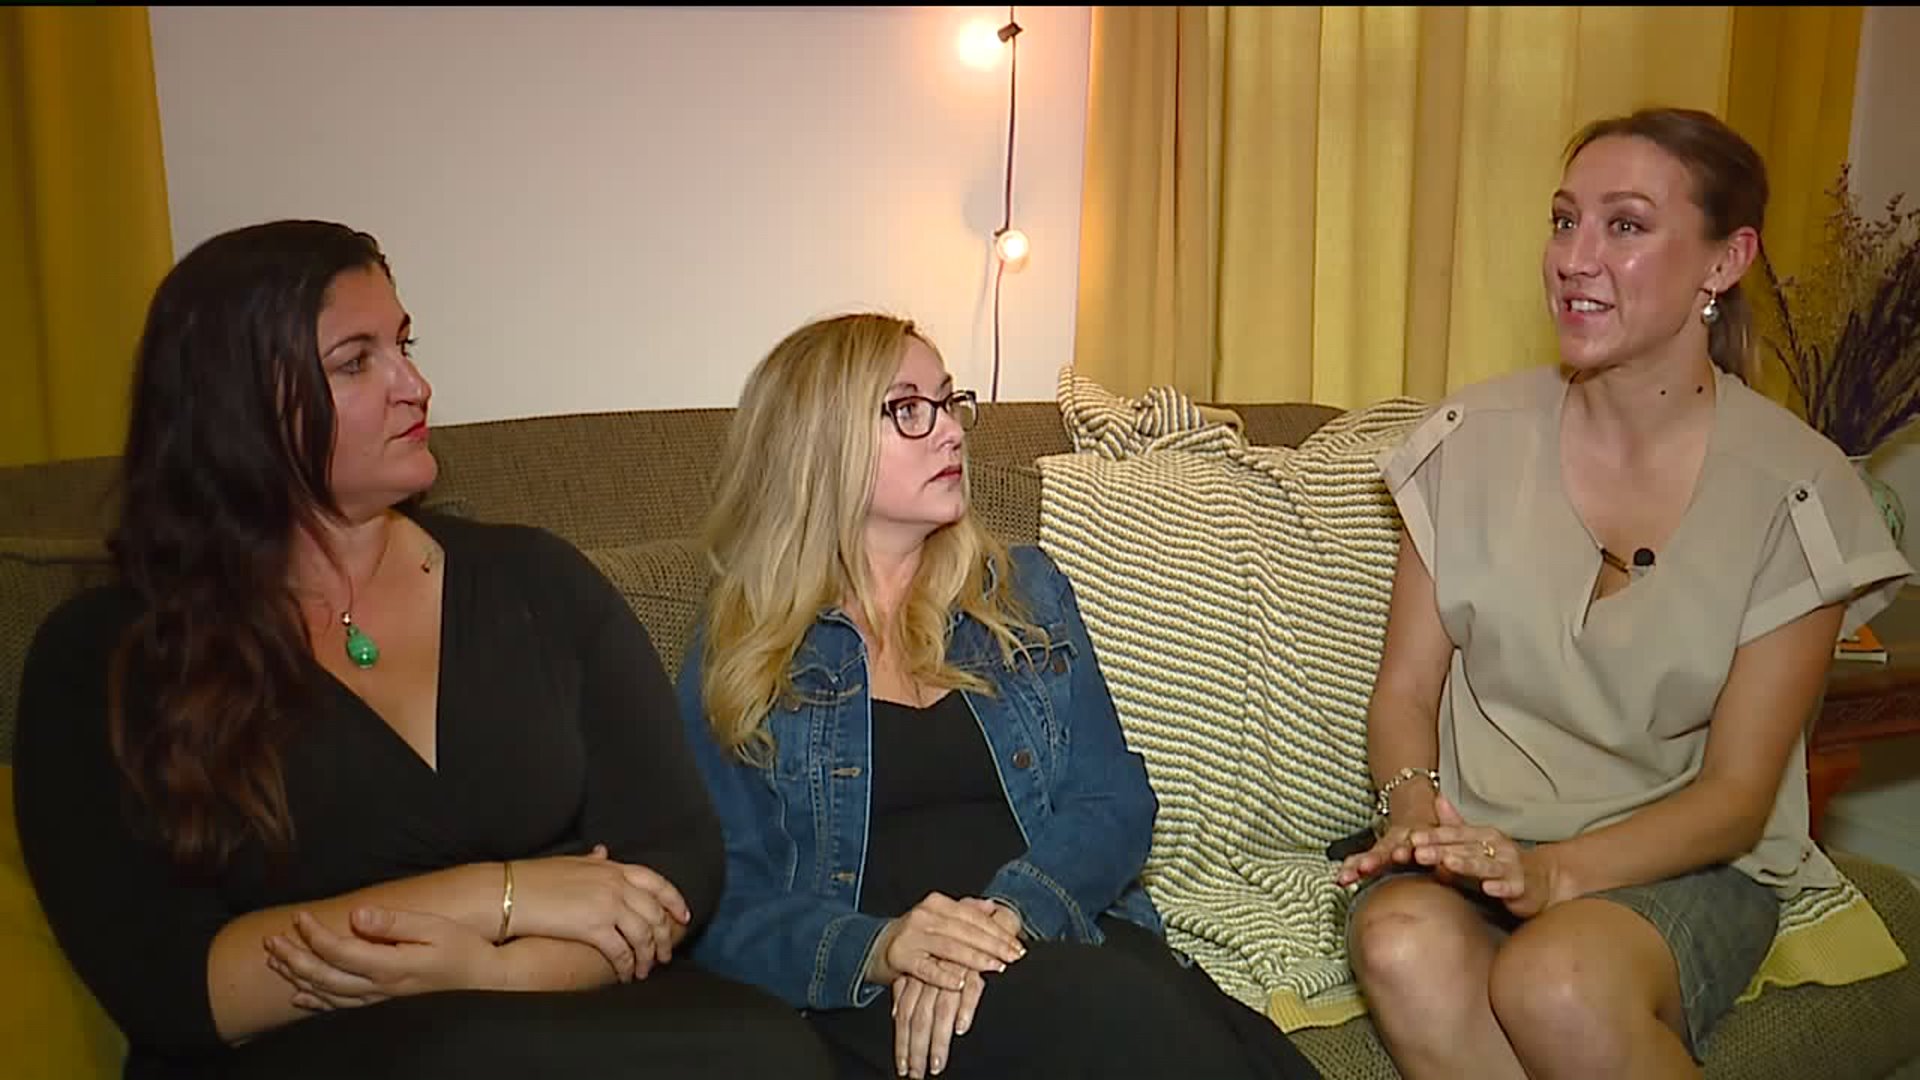 3 women claim they were terrorized by Uber driver